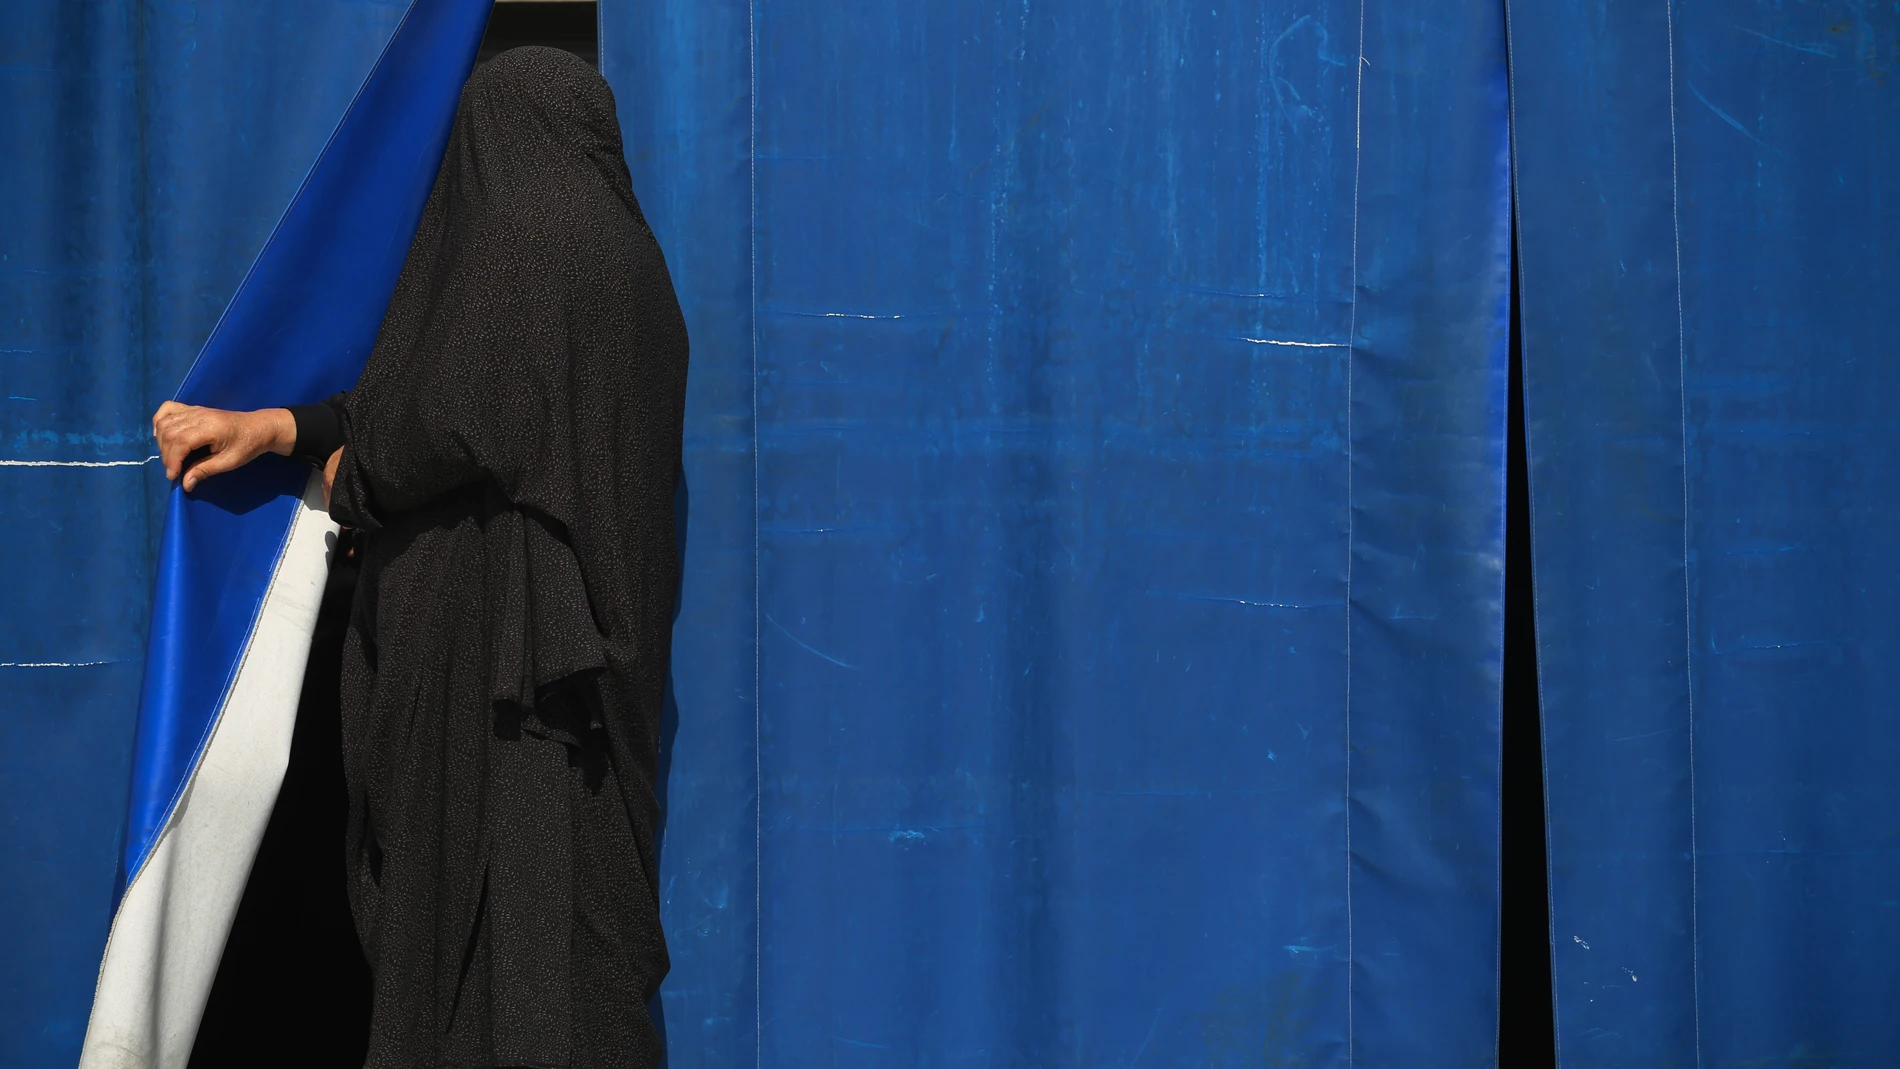 September 6, 2023, Shahr-e-Ray, Tehran, Iran: An Iranian veiled woman walks through the shrine of Shiite Saint Abdulazim, during the Arbaeen mourning ceremony, in Shahr-e-Ray, south of Tehran. Arbaeen marks the anniversary of the 40th day of mourning following the seventh-century death of the Prophet Muhammad's grandson Hussein at the hands of the Muslim Umayyad forces in the Battle of Karbala, in present-day Iraq, during the tumultuous first century of Islam's history. 06/09/2023